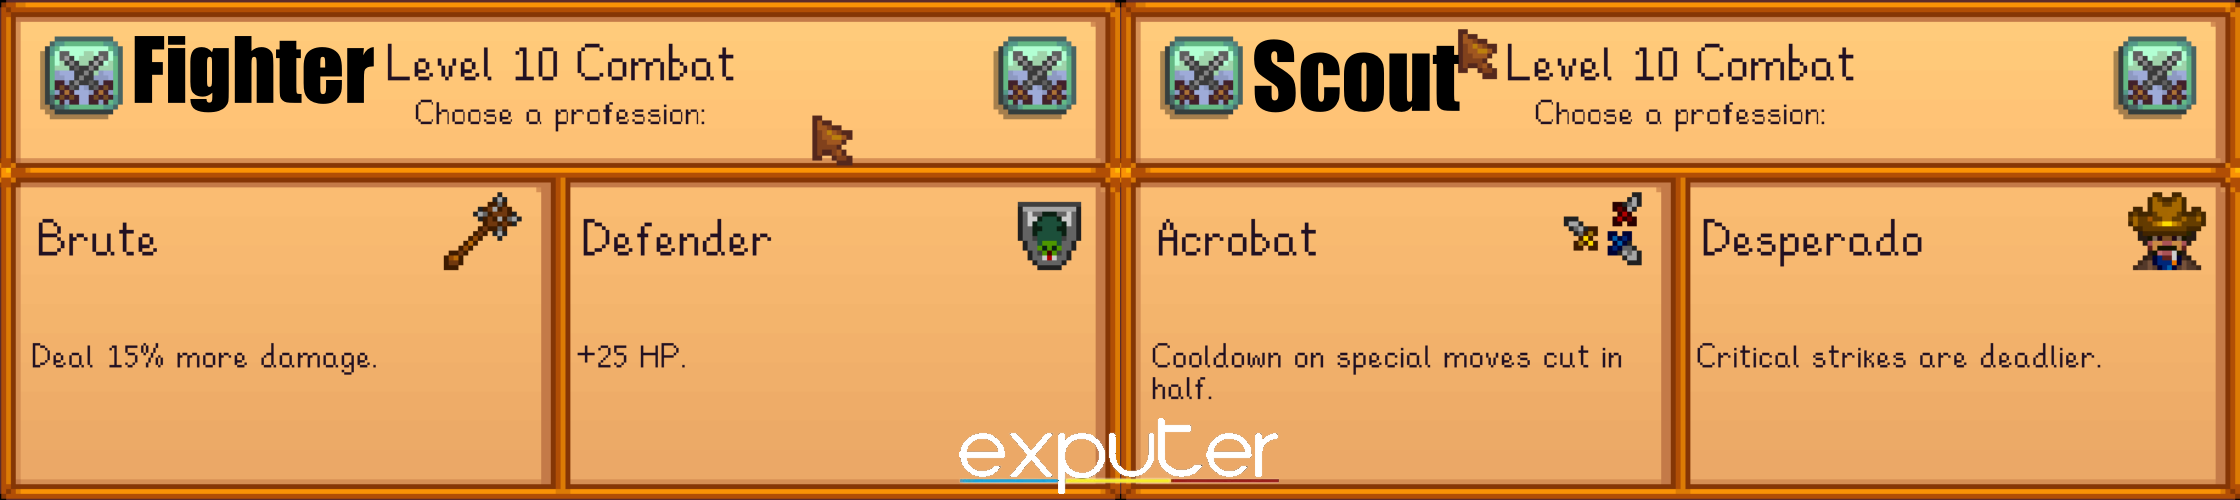 Stardew Valley Fighter vs. Scout 